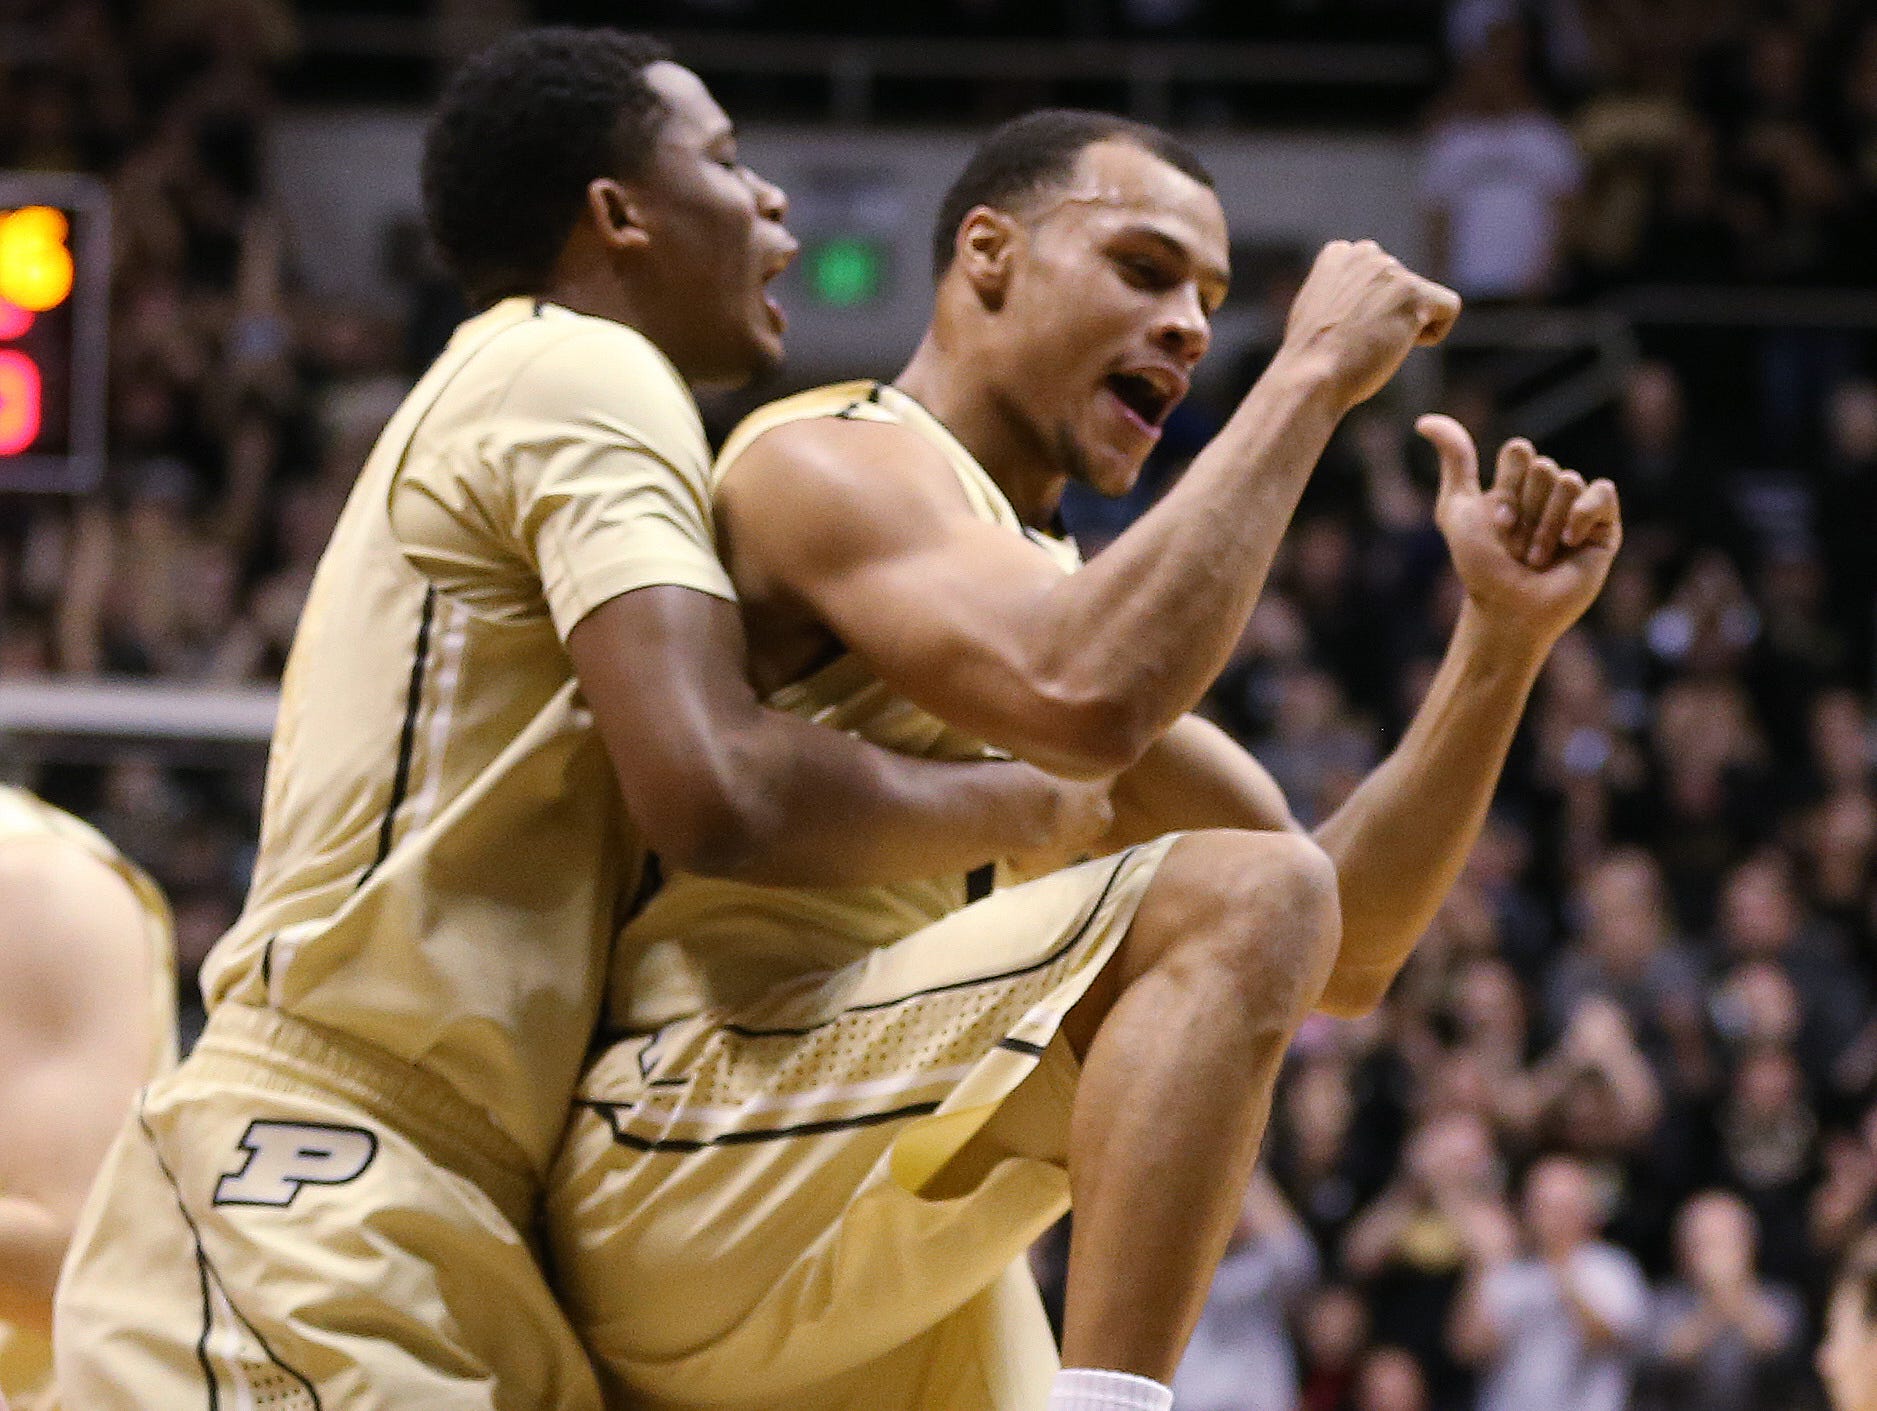 Purdue Boilermakers forward Basil Smotherman and teammate Bryson Scott celebrate Purdue's double digit lead over Indiana in the first half. Purdue hosted Indiana at Mackey Arena Wednesday, January 28, 2015.